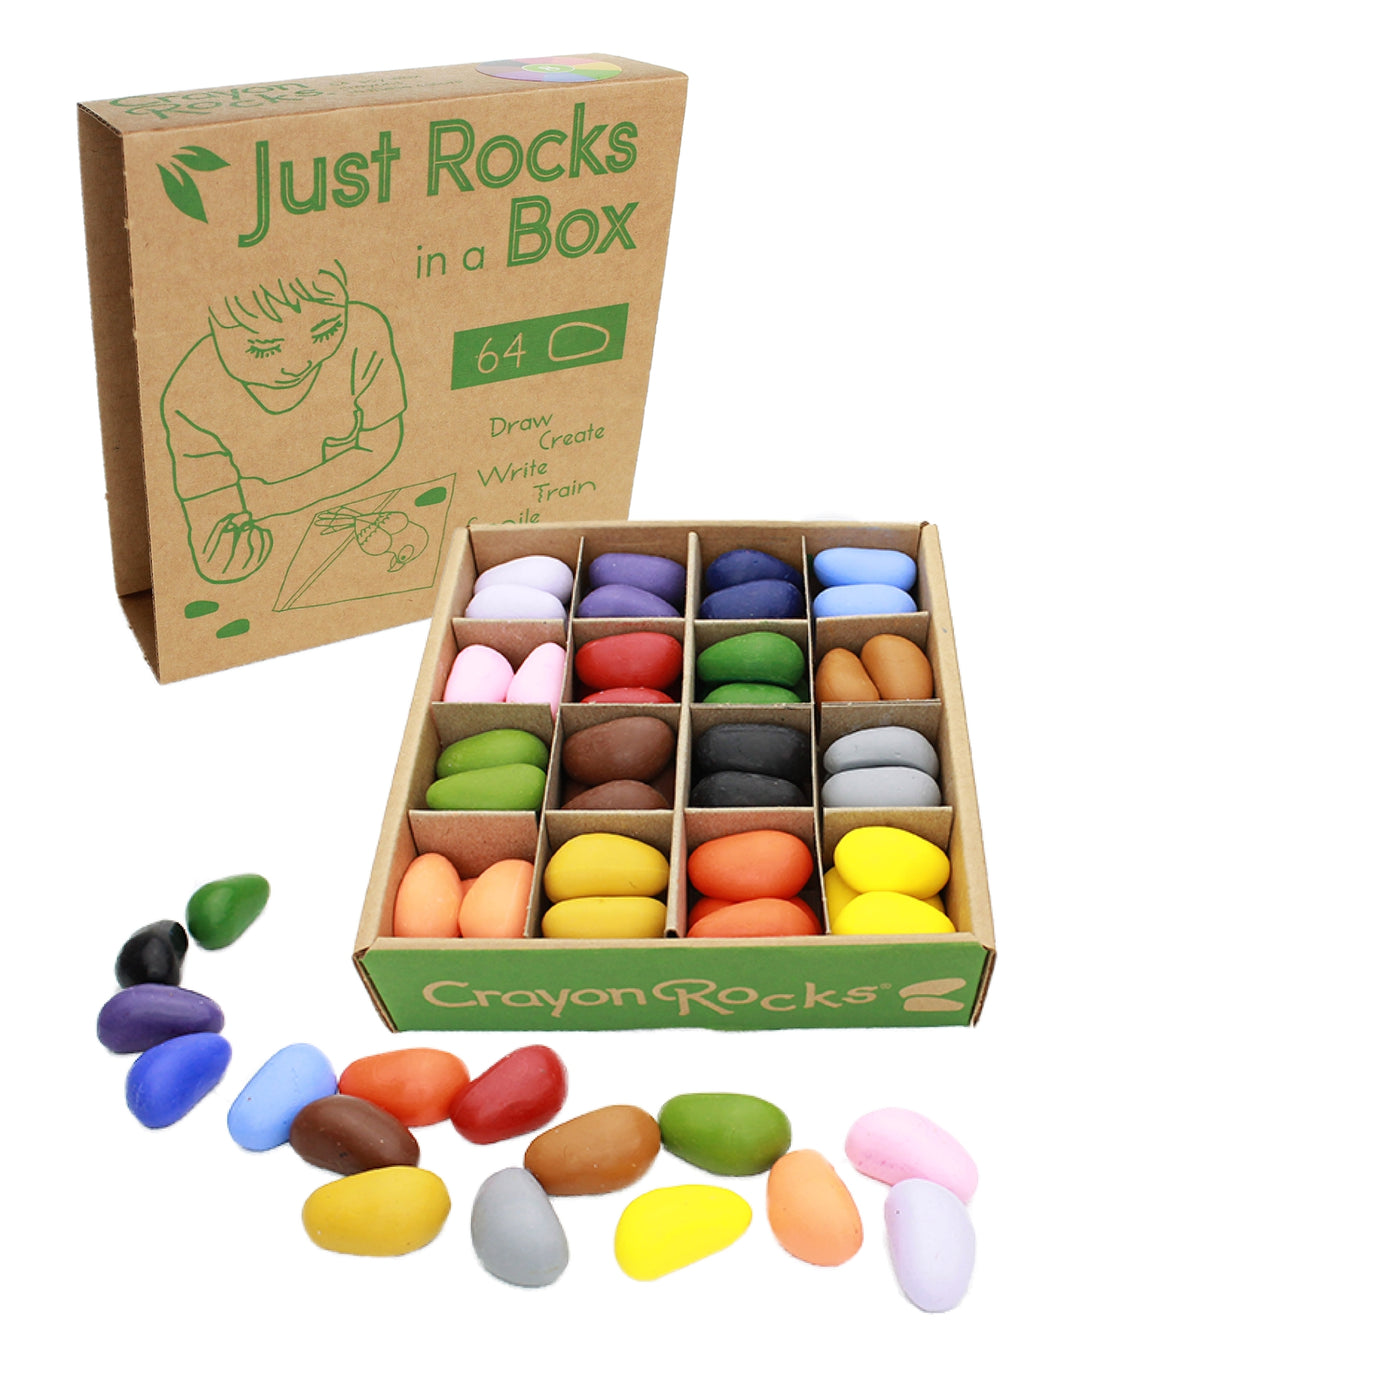 64 Crayon Rocks (4 Sets of 16 colors in a Box)